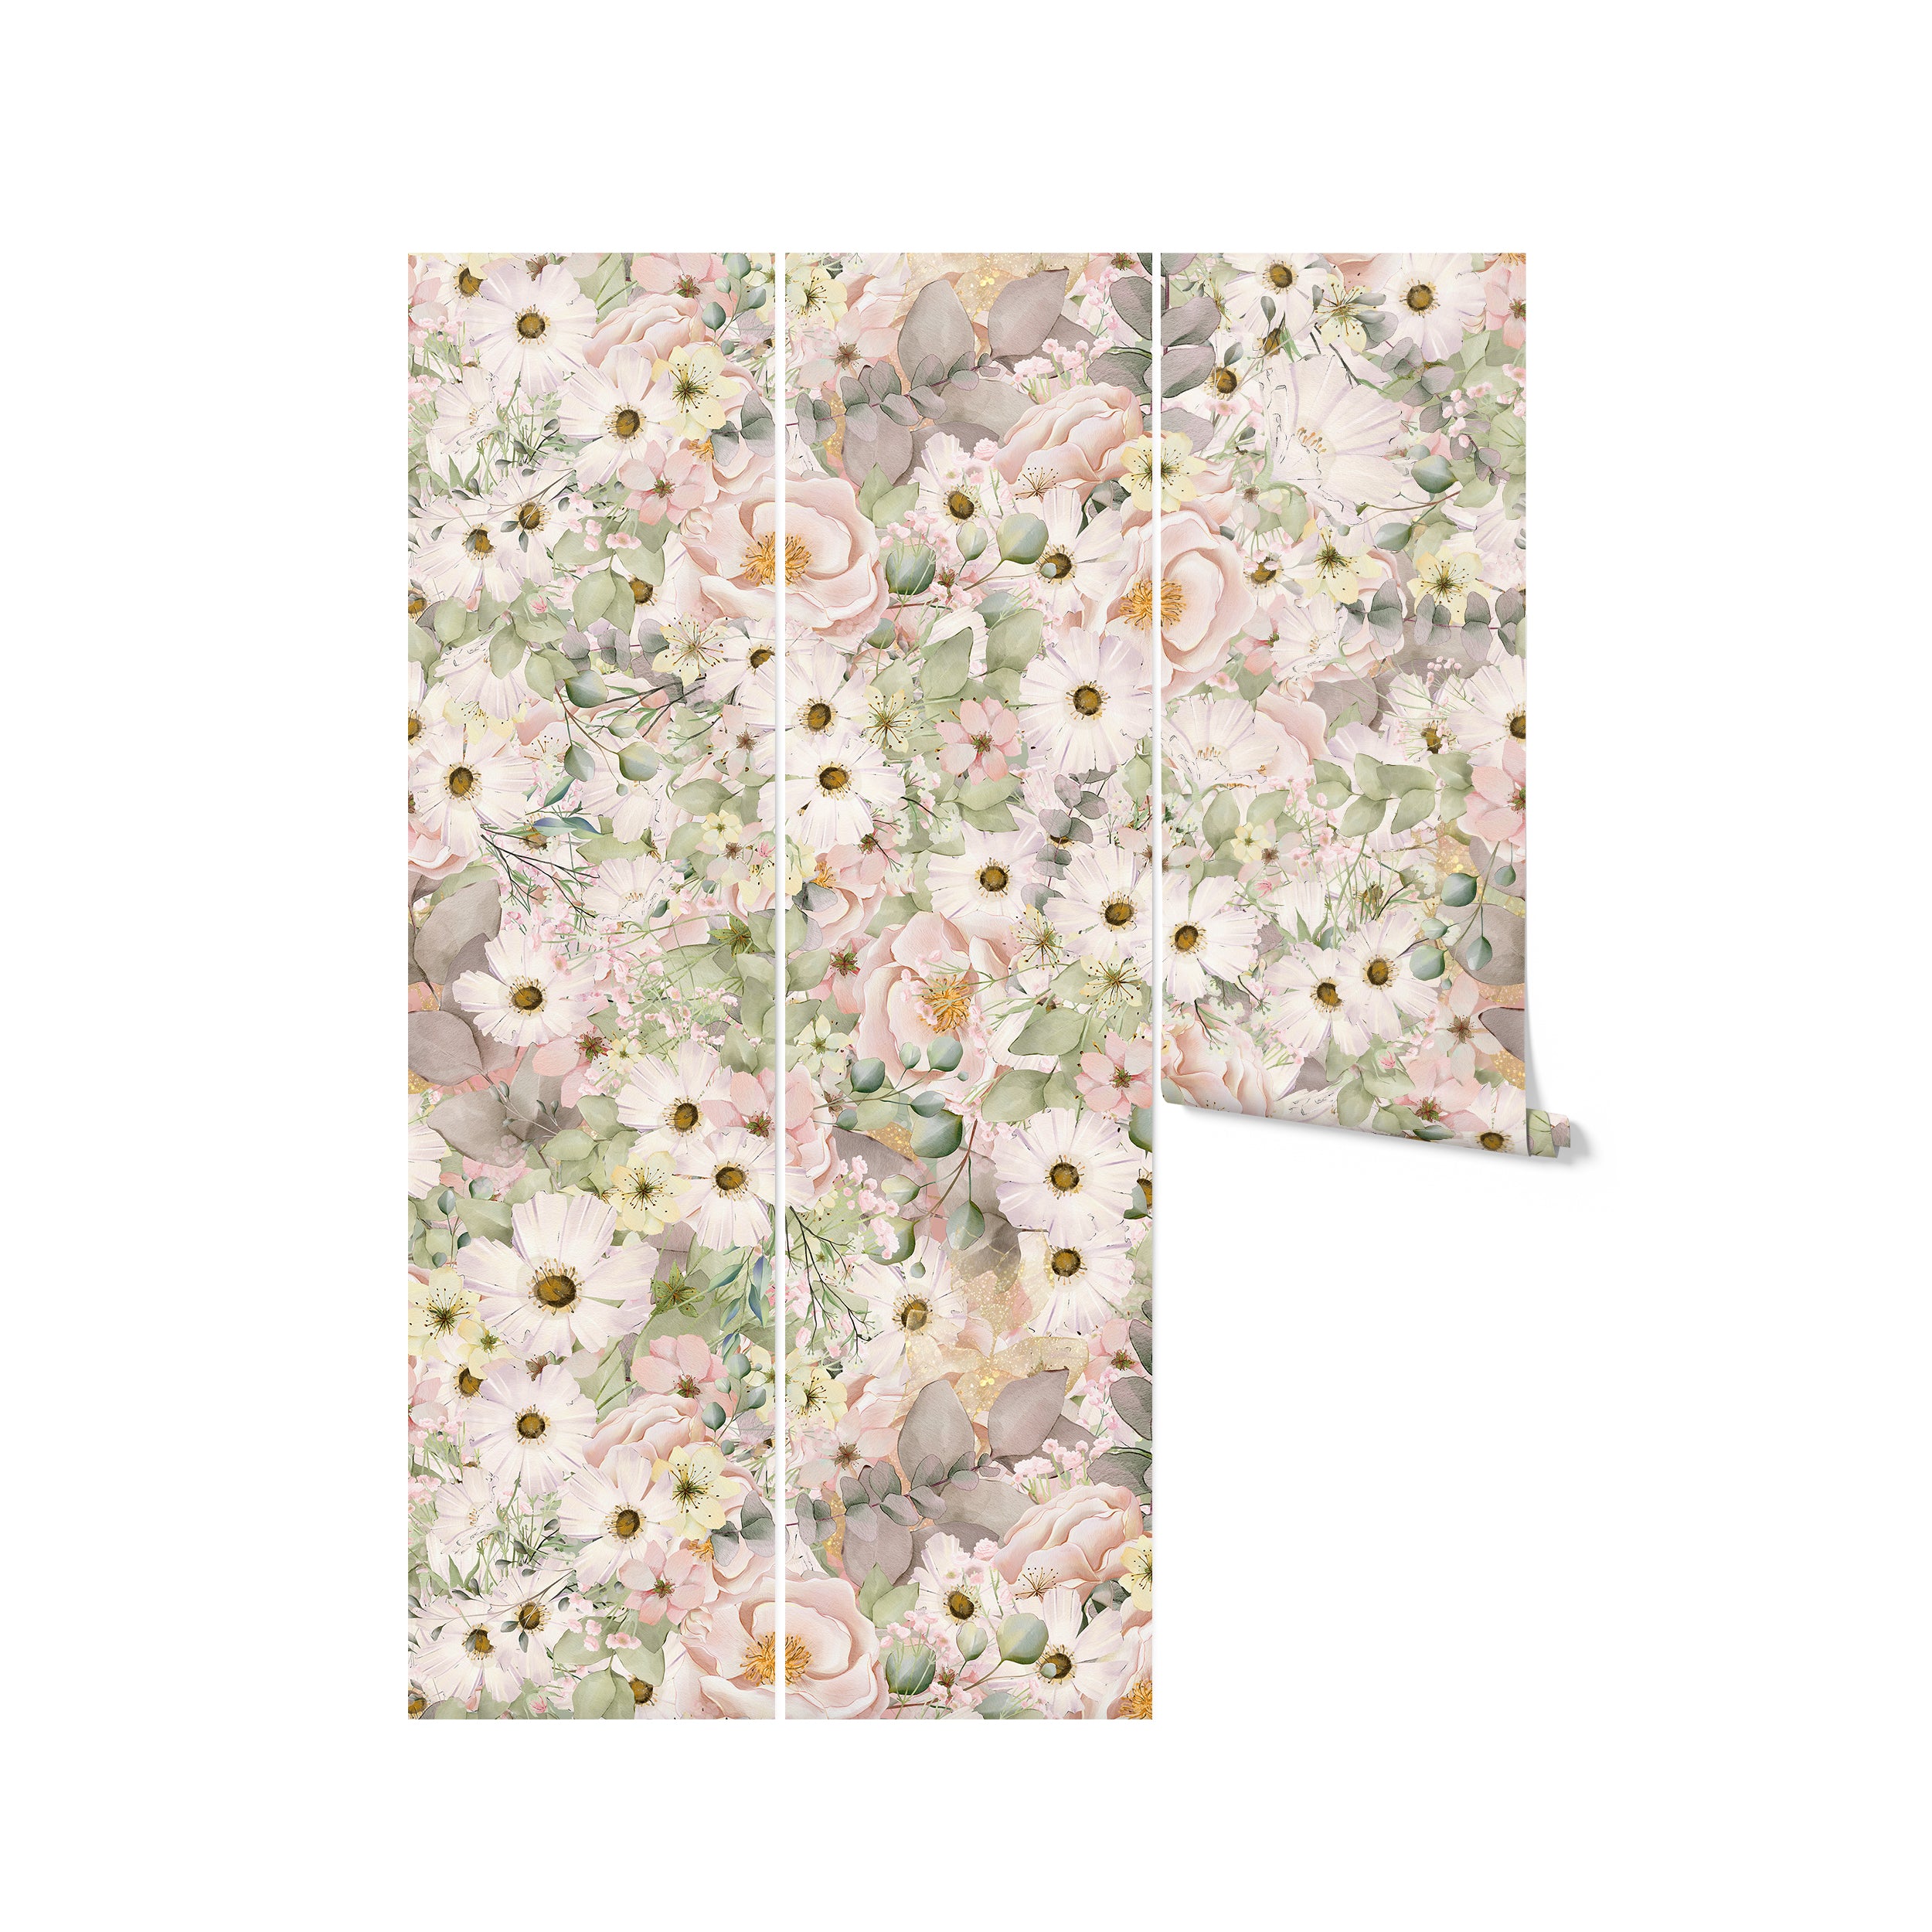 A roll of Pink Fleur Wallpaper - 75", showcasing the seamless floral design that combines soft pink tones with green foliage, ideal for adding a touch of elegance and freshness to any interior space